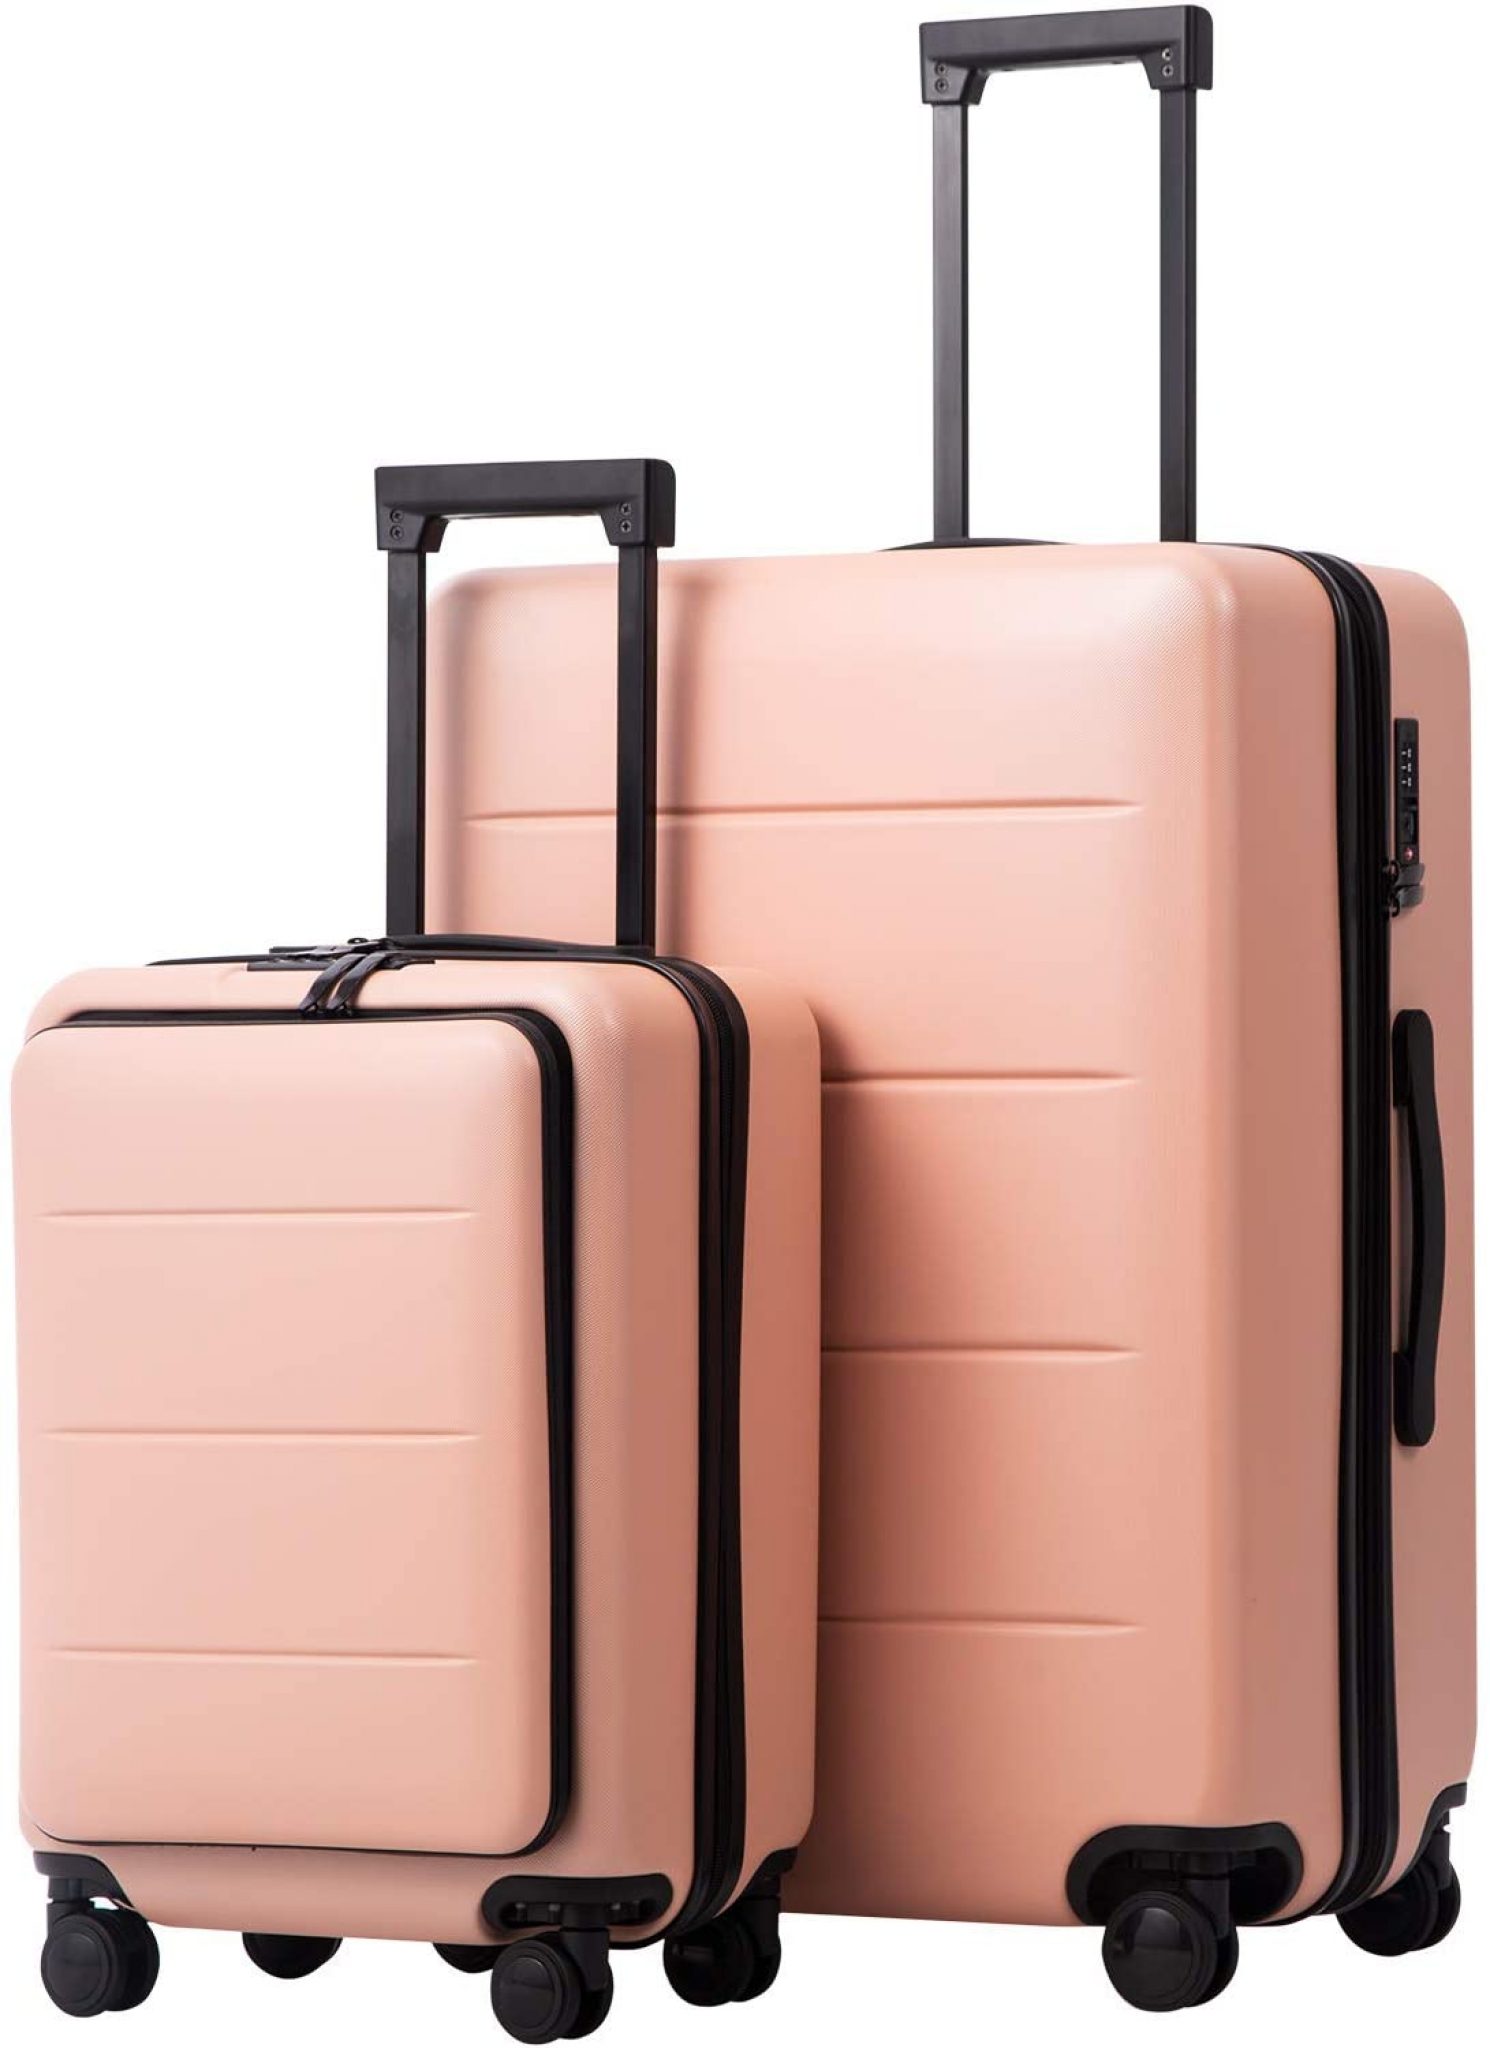 Coolife Luggage Sets Review & Rating - Luggage & Travel